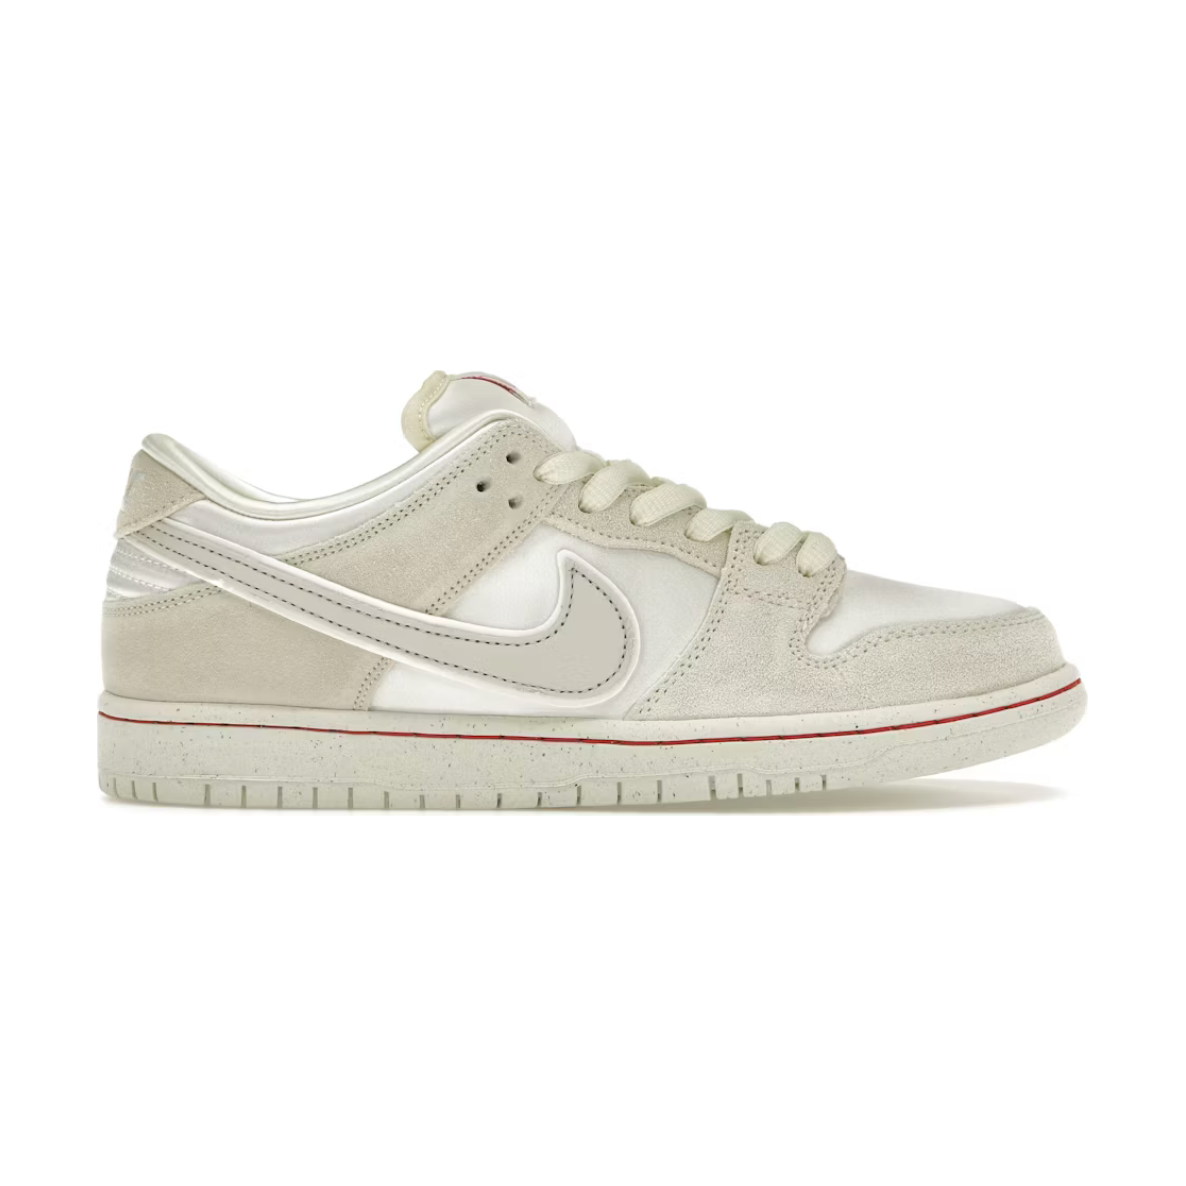 Nike SB Dunk Low City Of Love Light Bone by Nike from £165.00